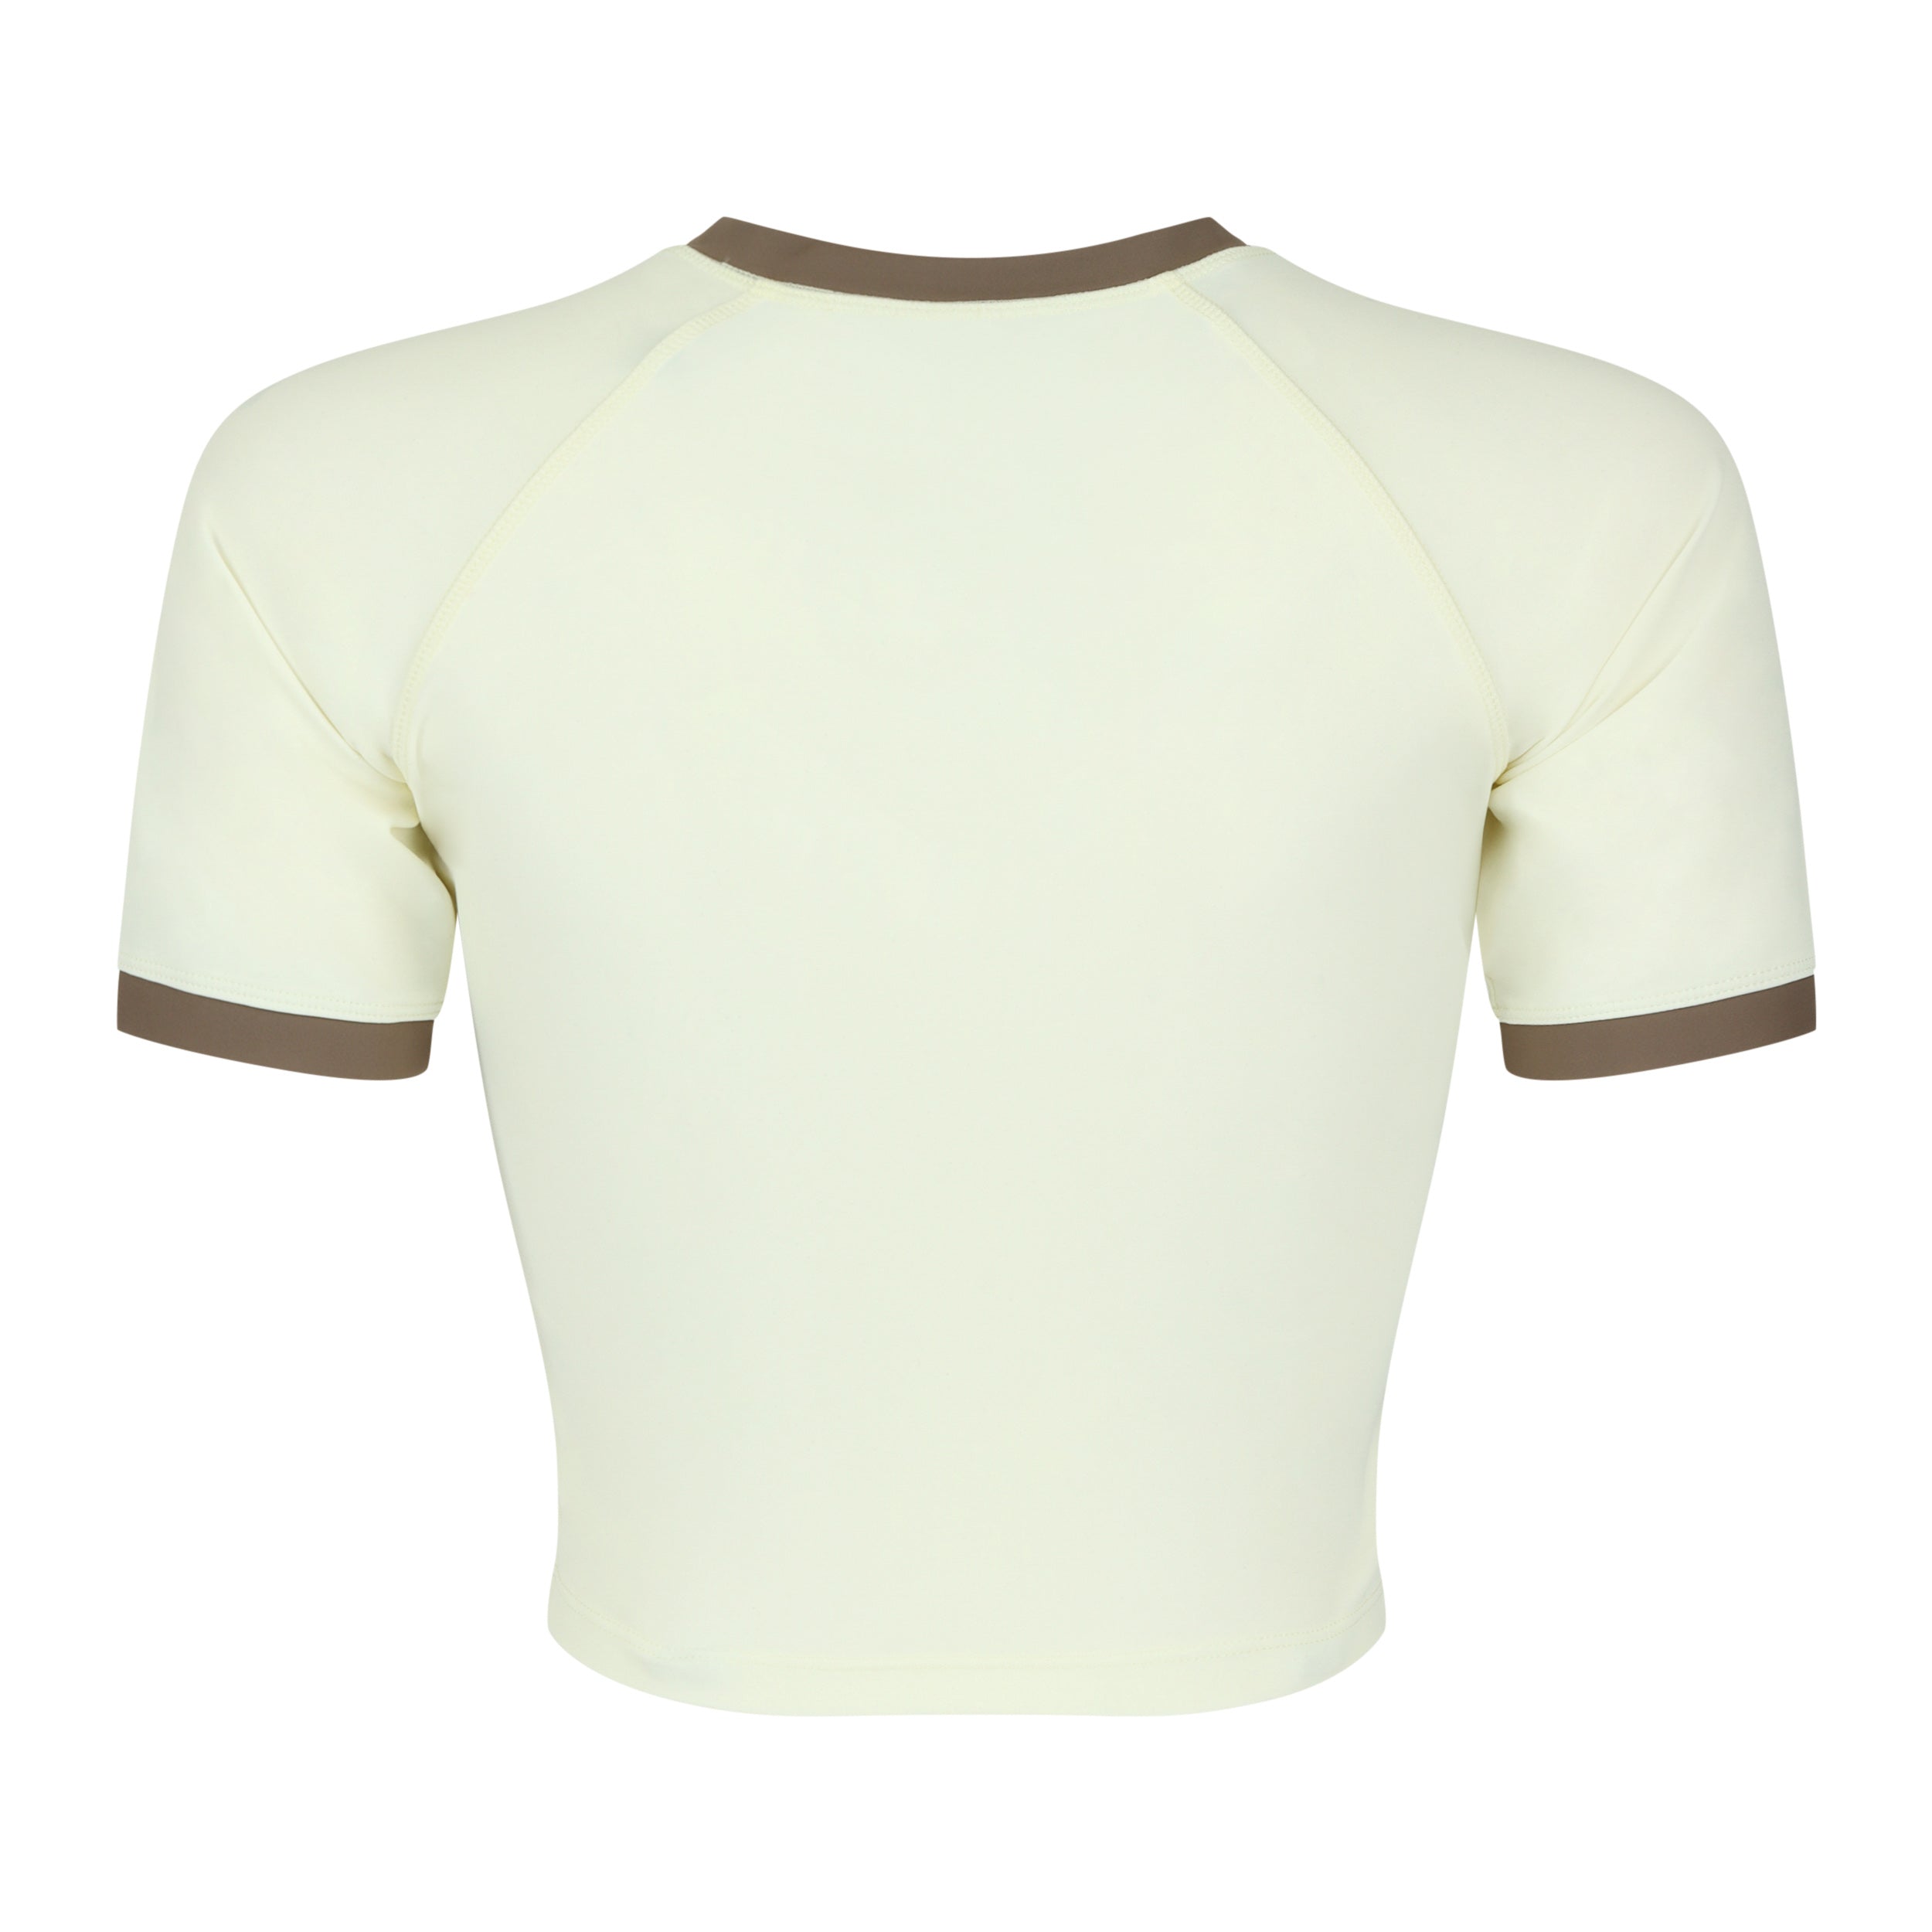 Swami’s Surf Top - Pearl